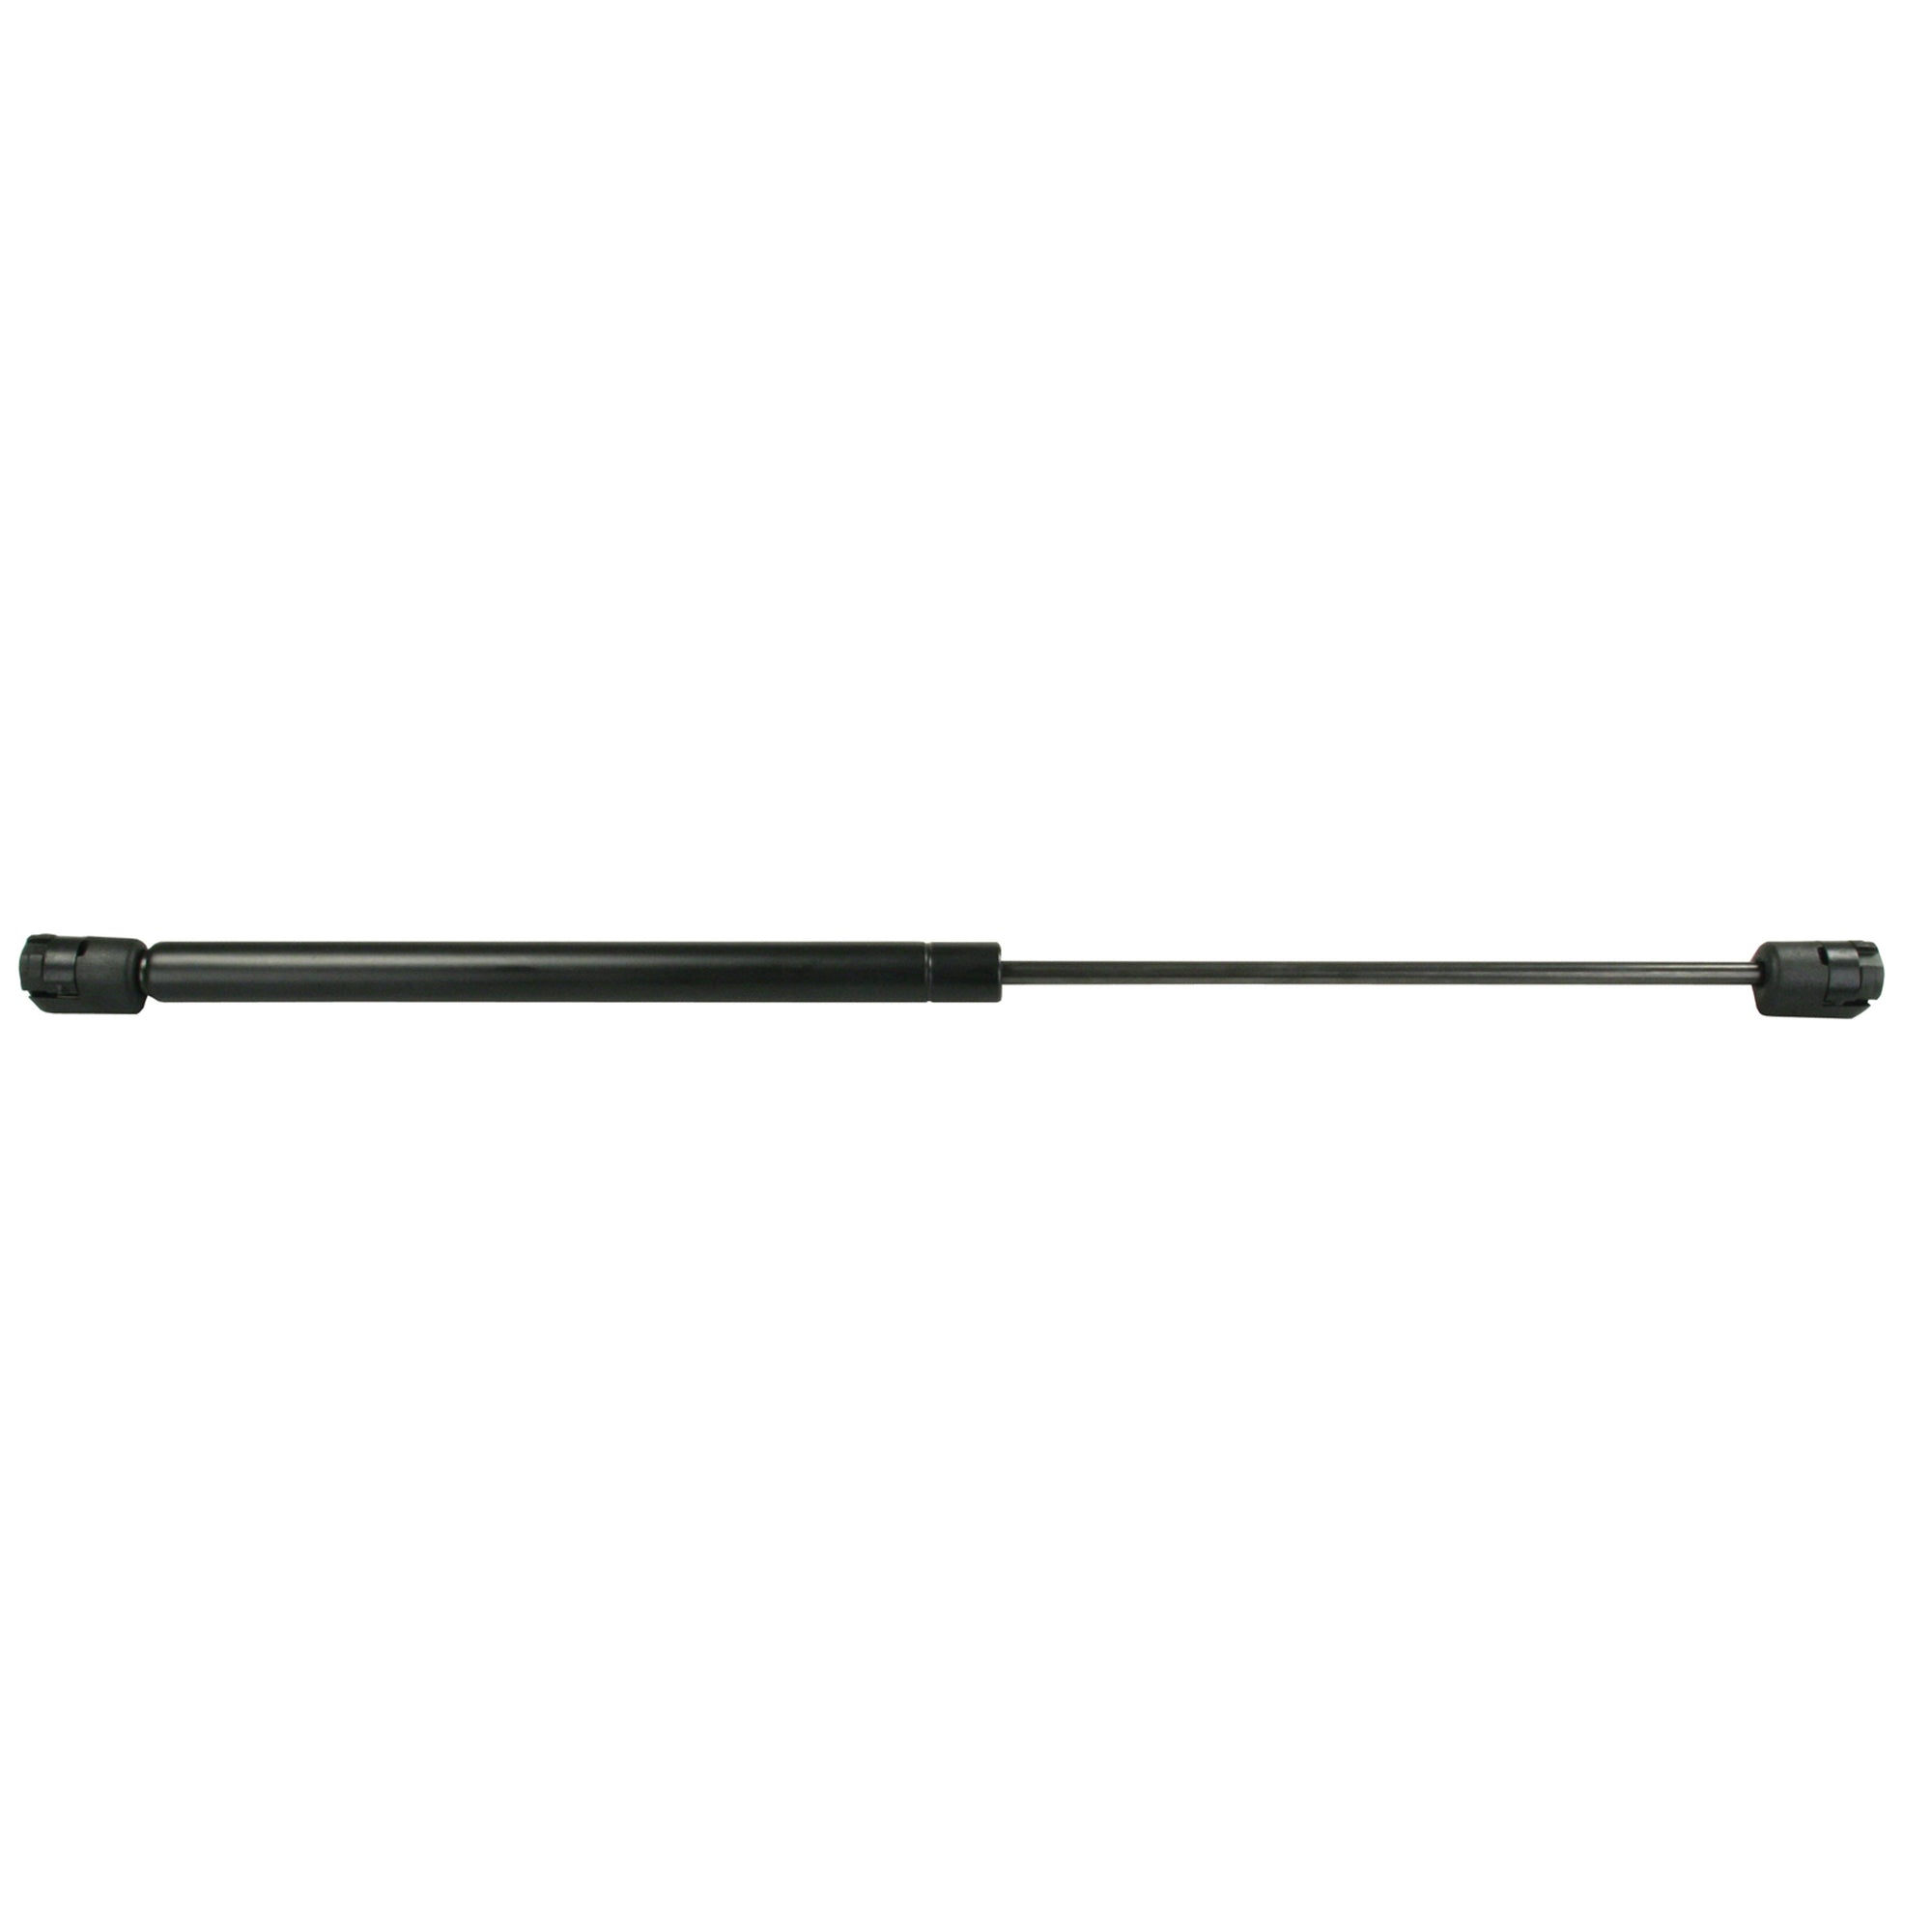 JR Products GSNI-4900-60 Gas Spring